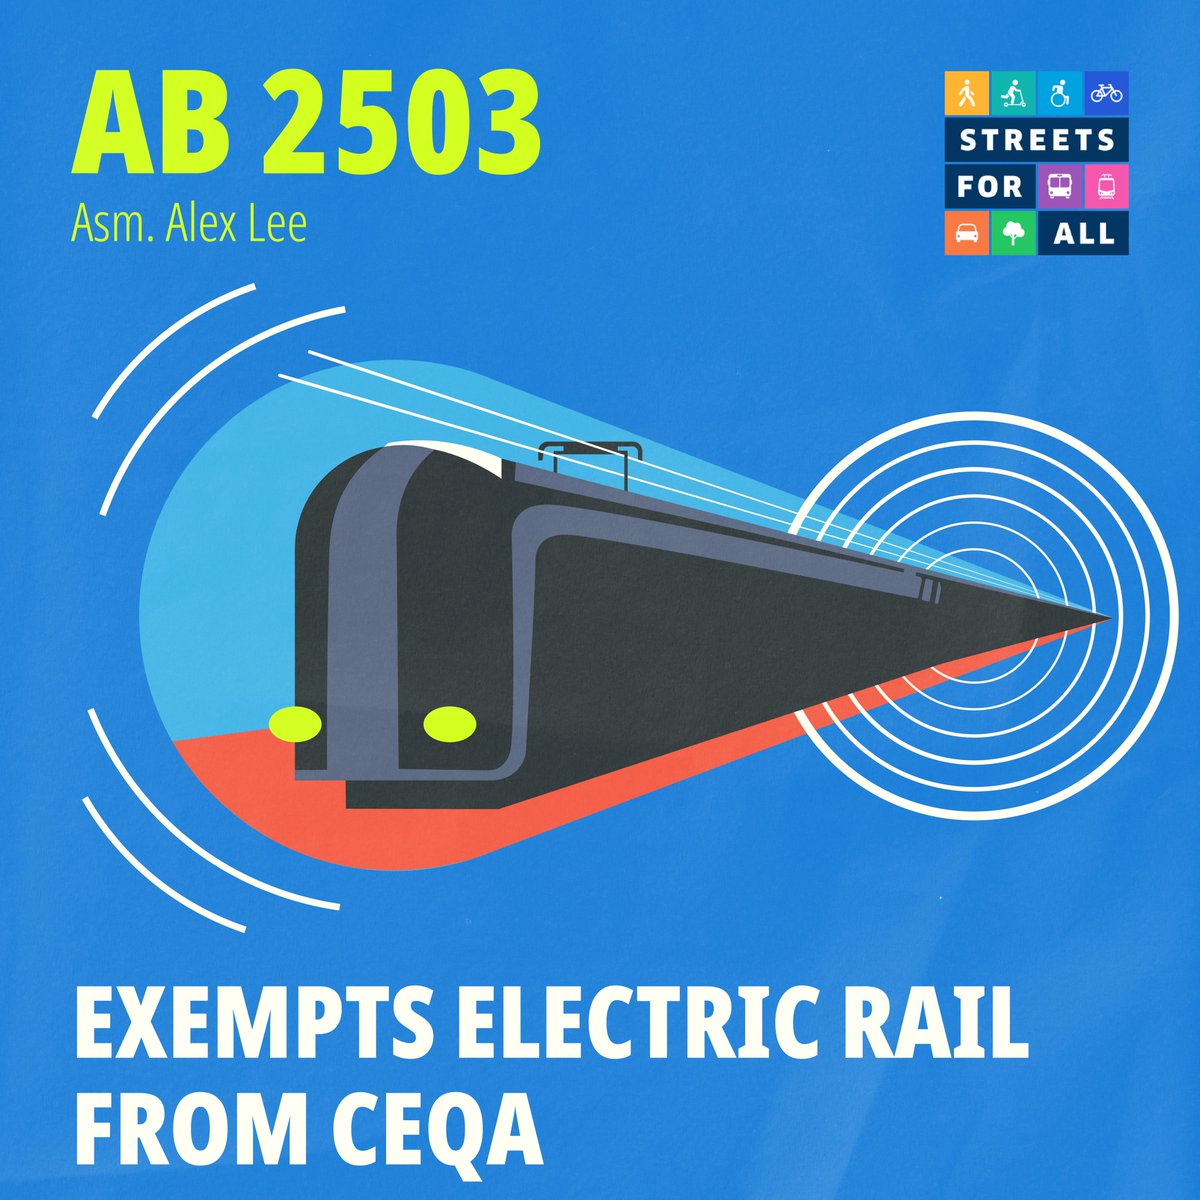 ✅ AB 2503 passed natural resources committee with bipartisan support! Our bill by @alex_lee stops exempts rail projects from CEQA. Thank you!